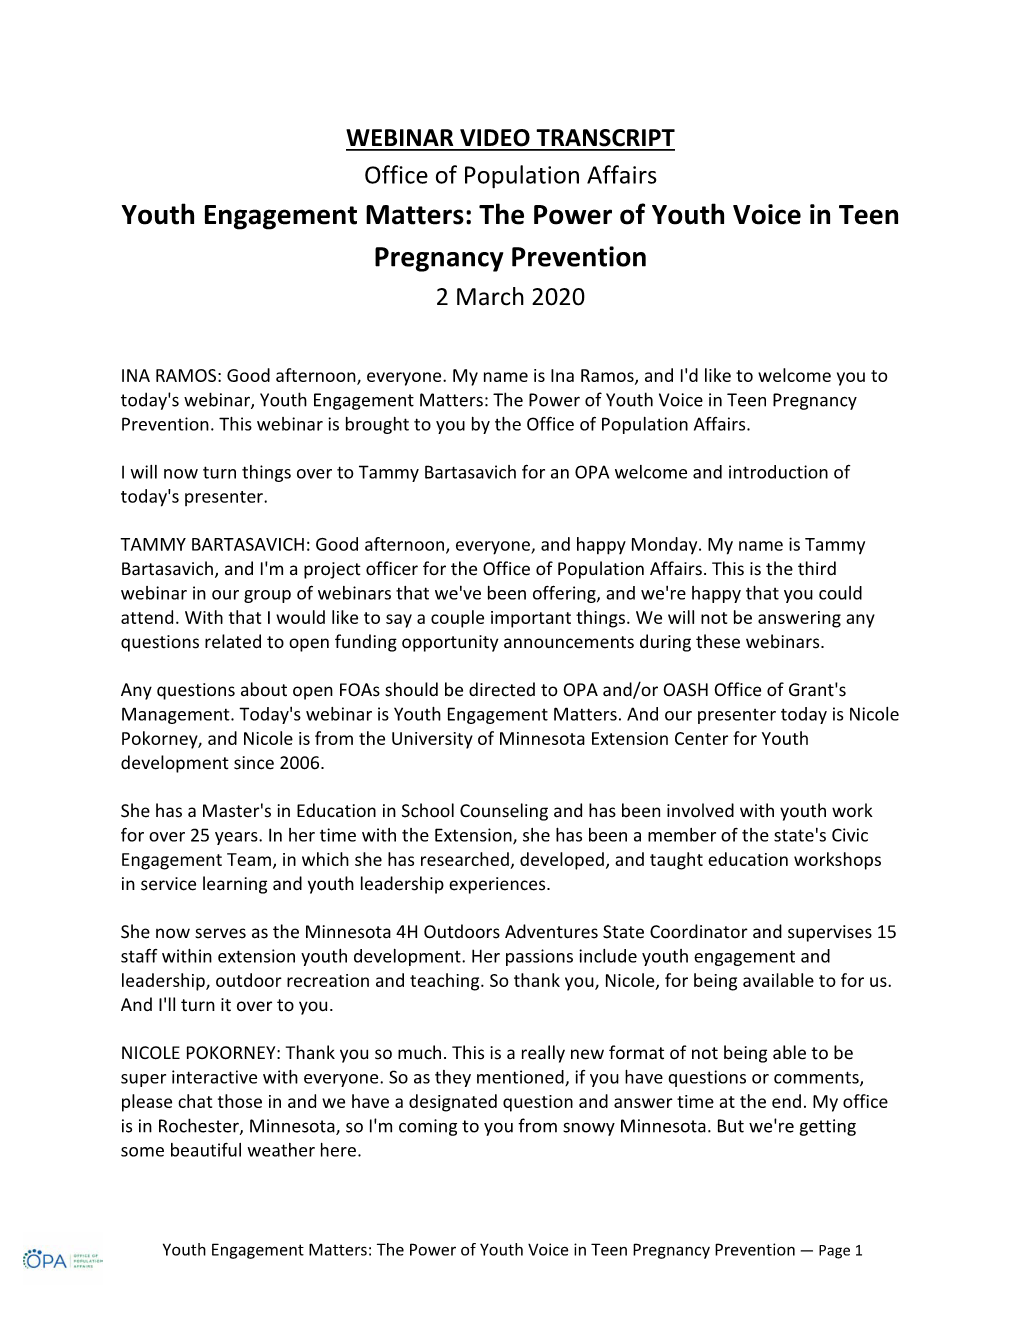 Youth Engagement Matters: the Power of Youth Voice in Teen Pregnancy Prevention 2 March 2020